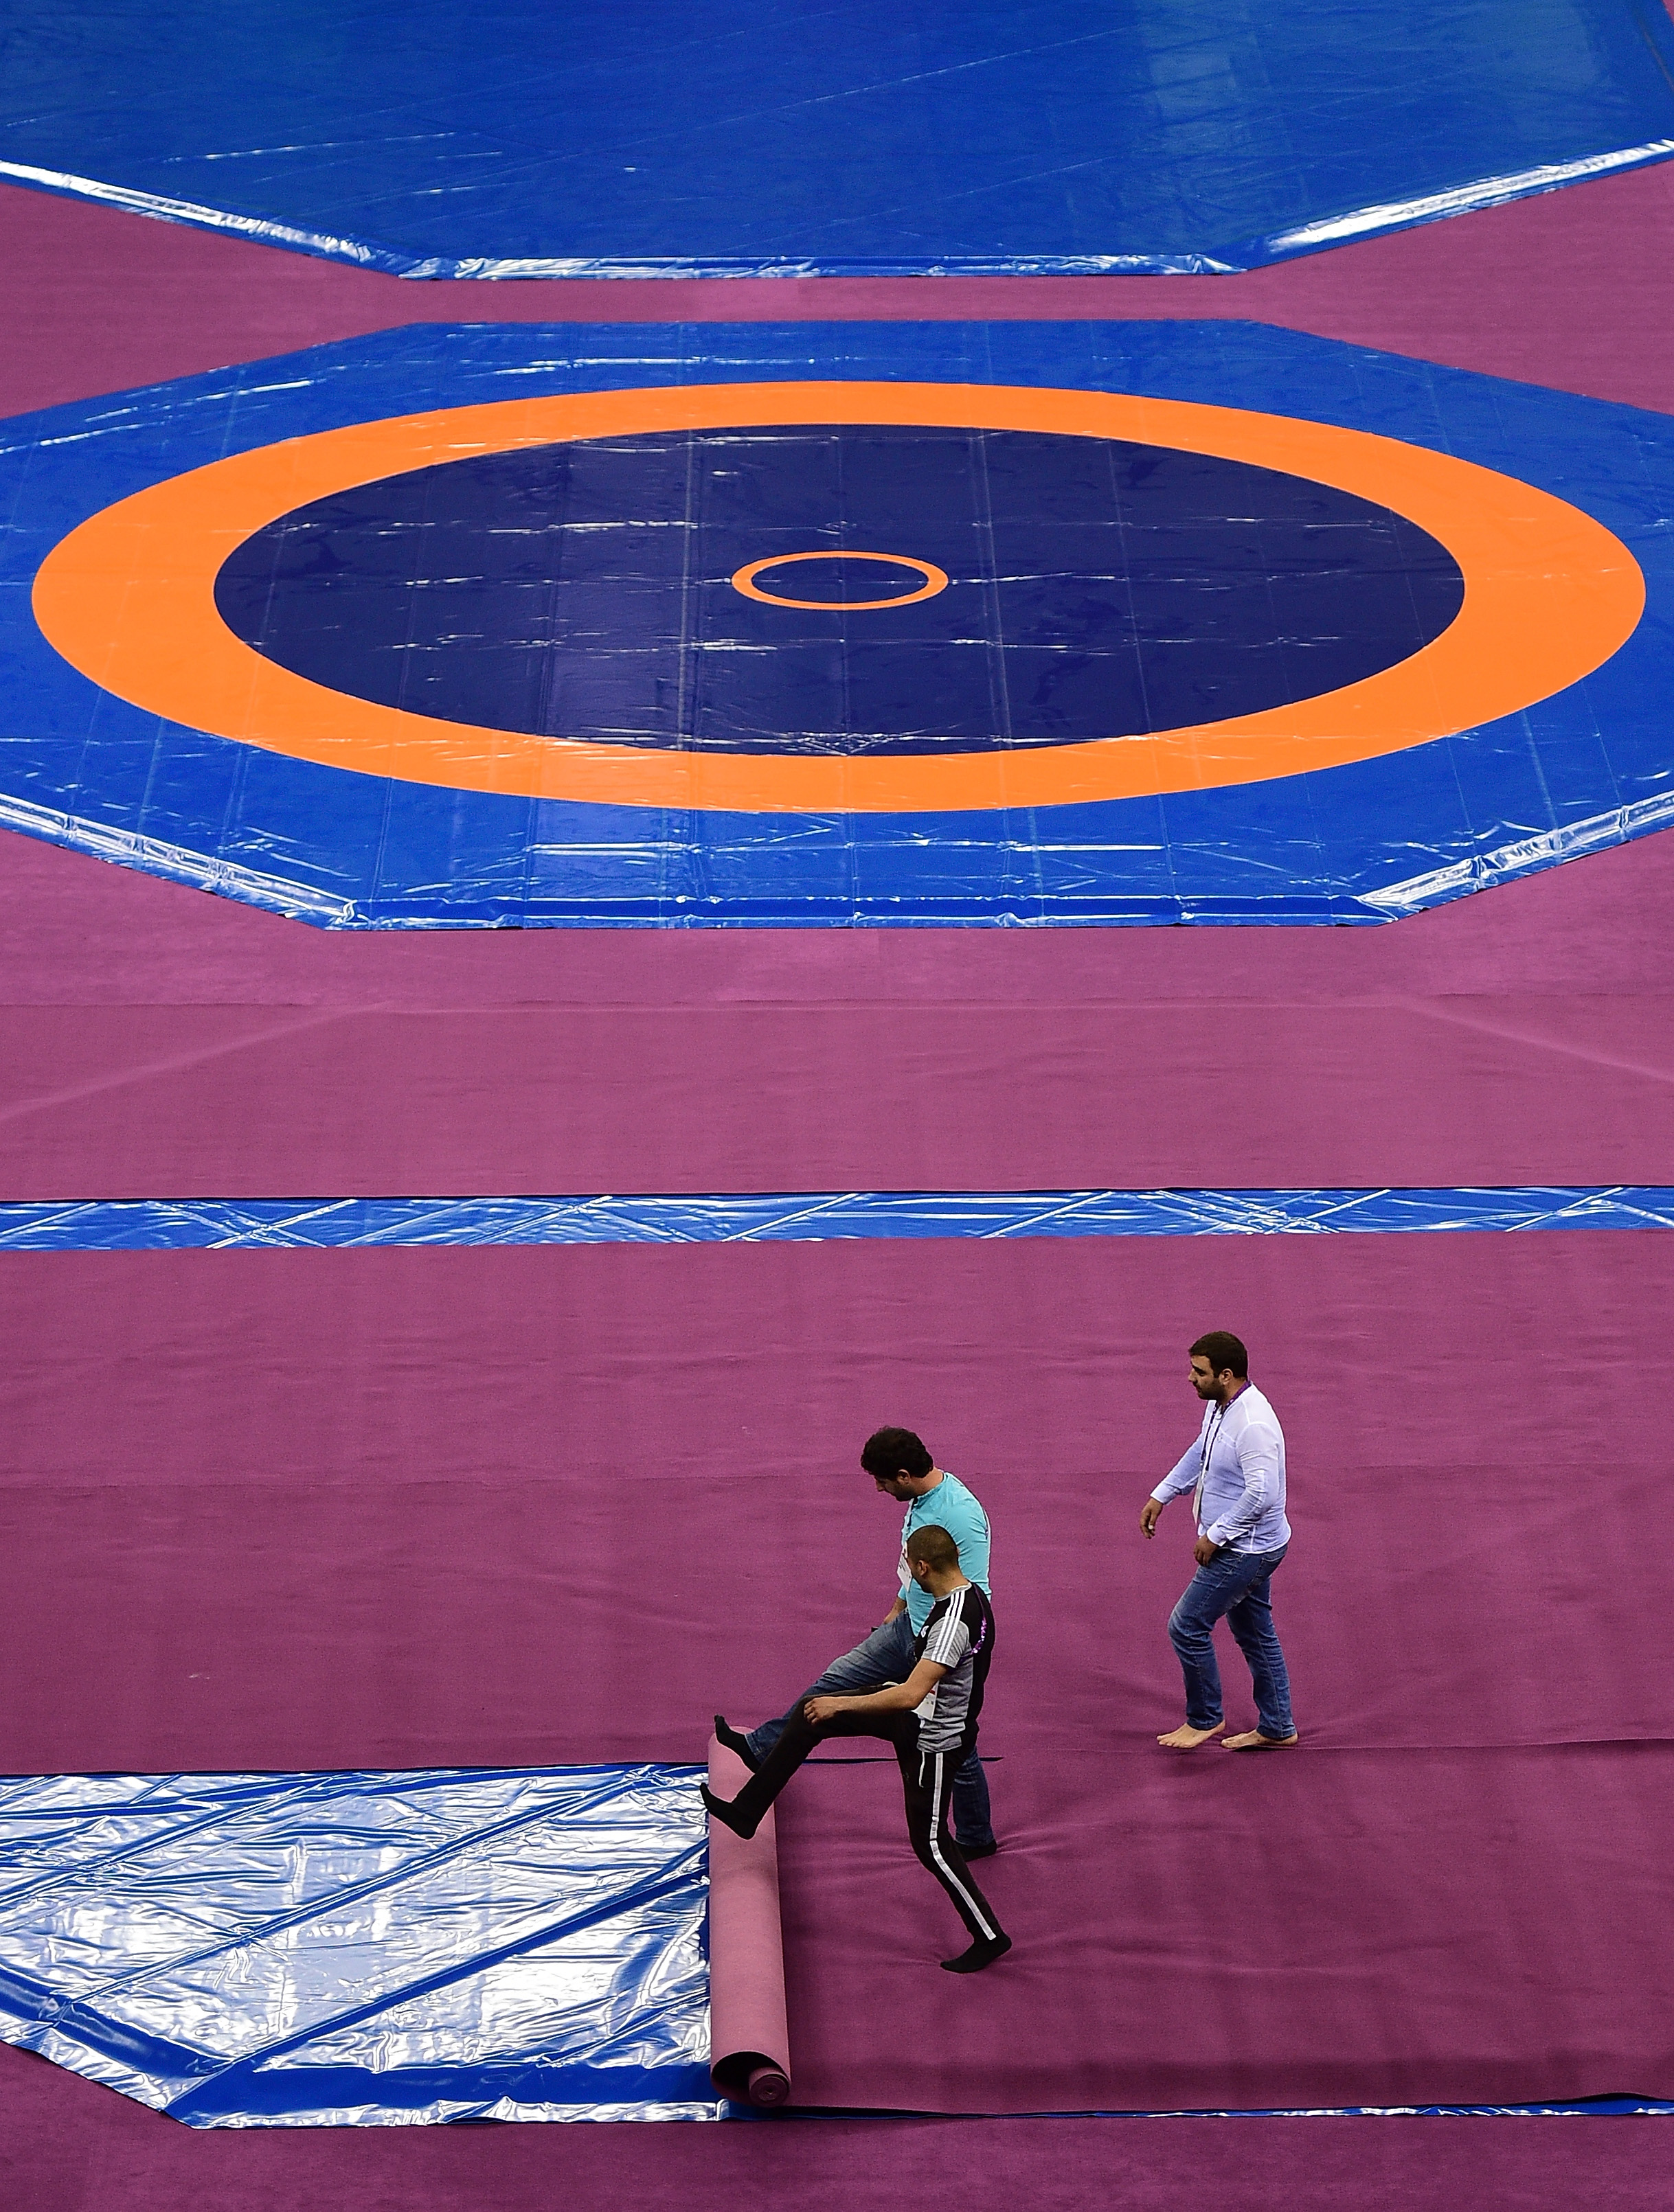 World Wrestling Championship round up | India starts on the wrong foot as four Greco-Roman grapplers crash out in the round of 32